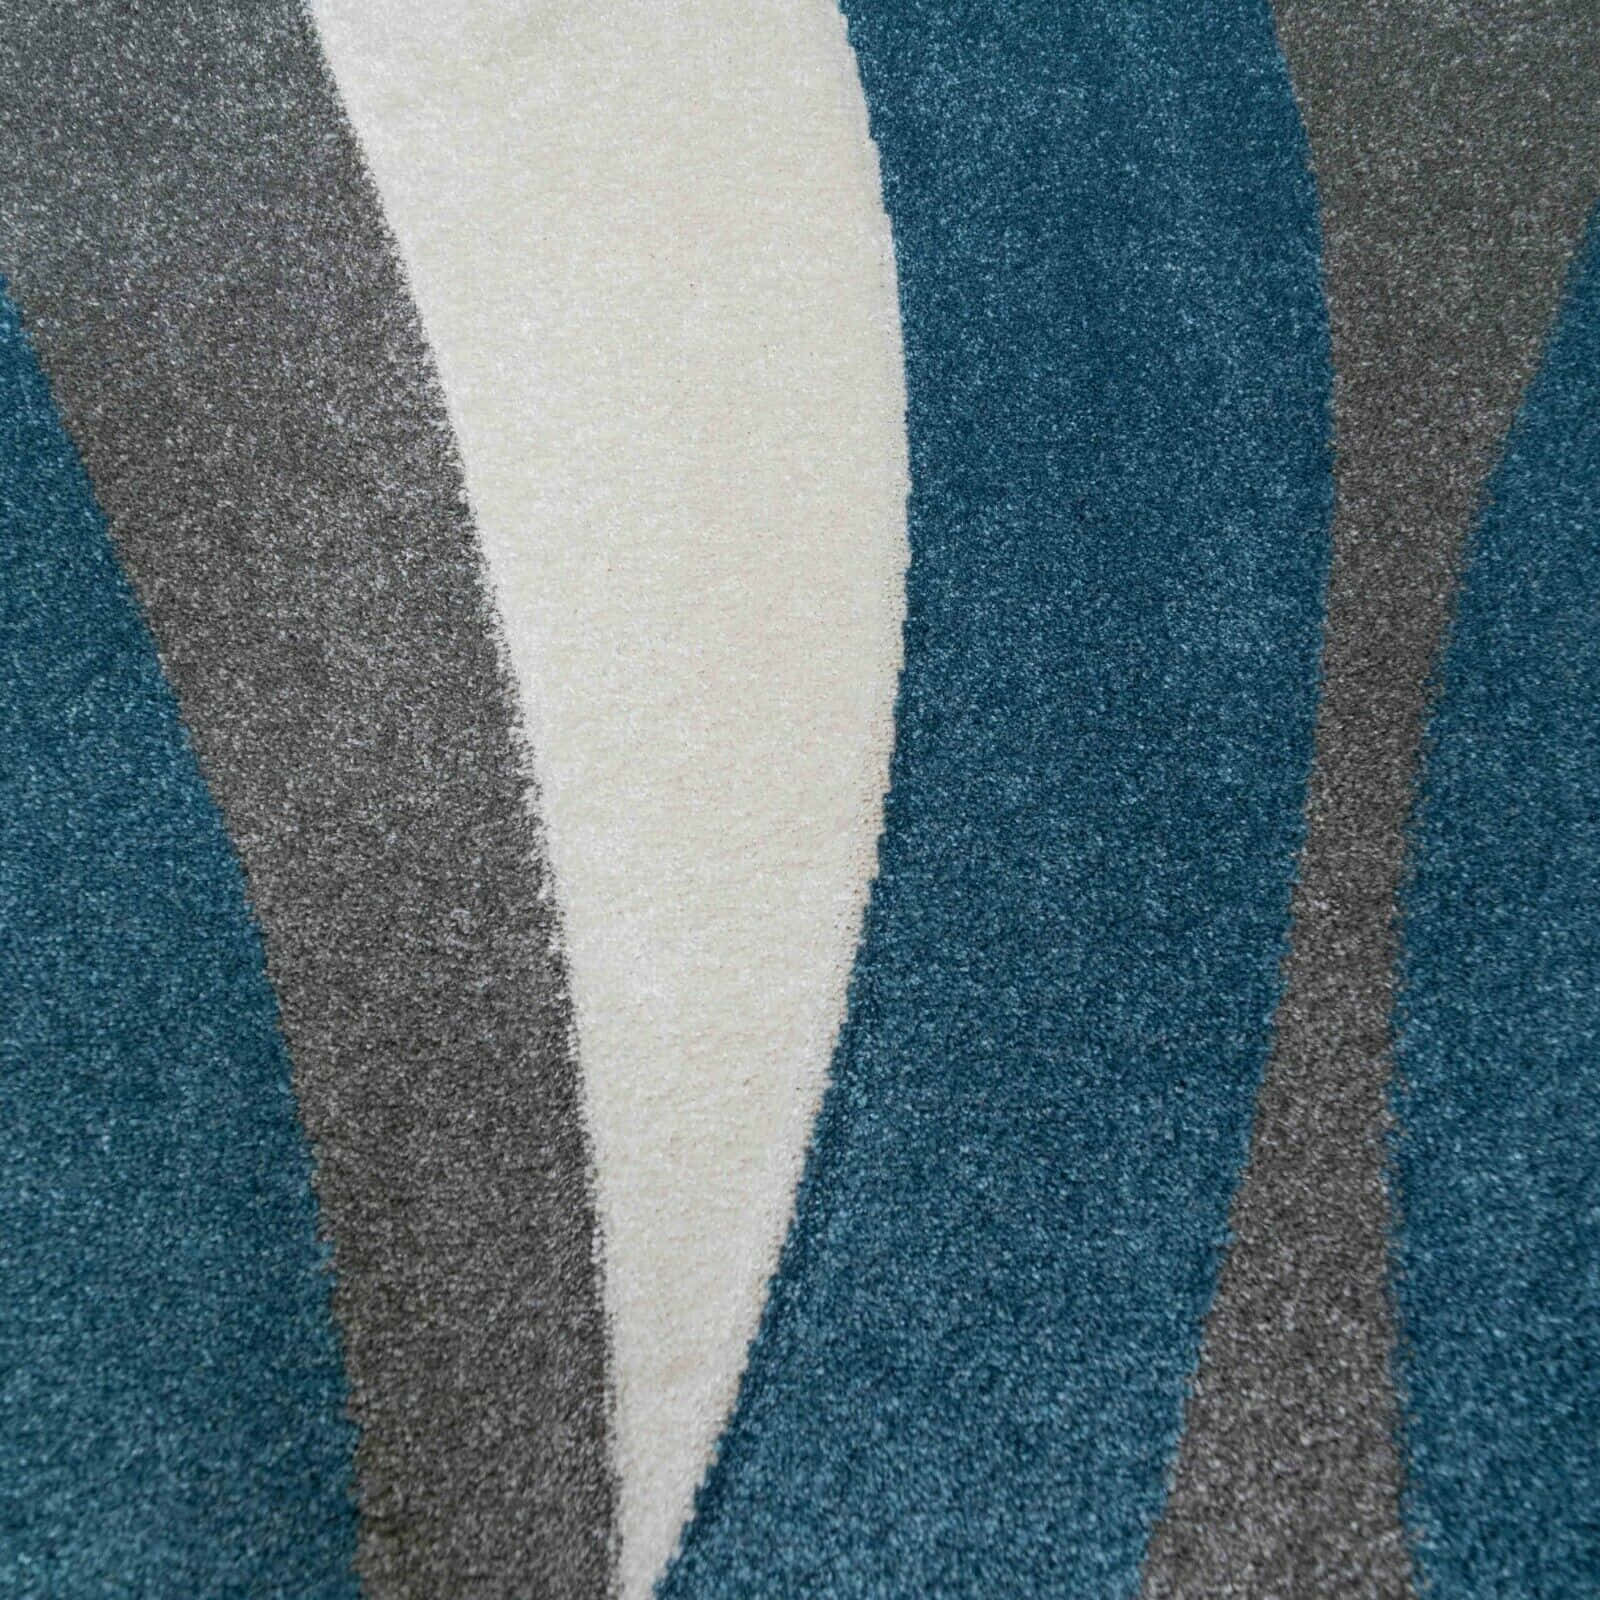 A Close-up View of Rich and Warm Carpet Texture